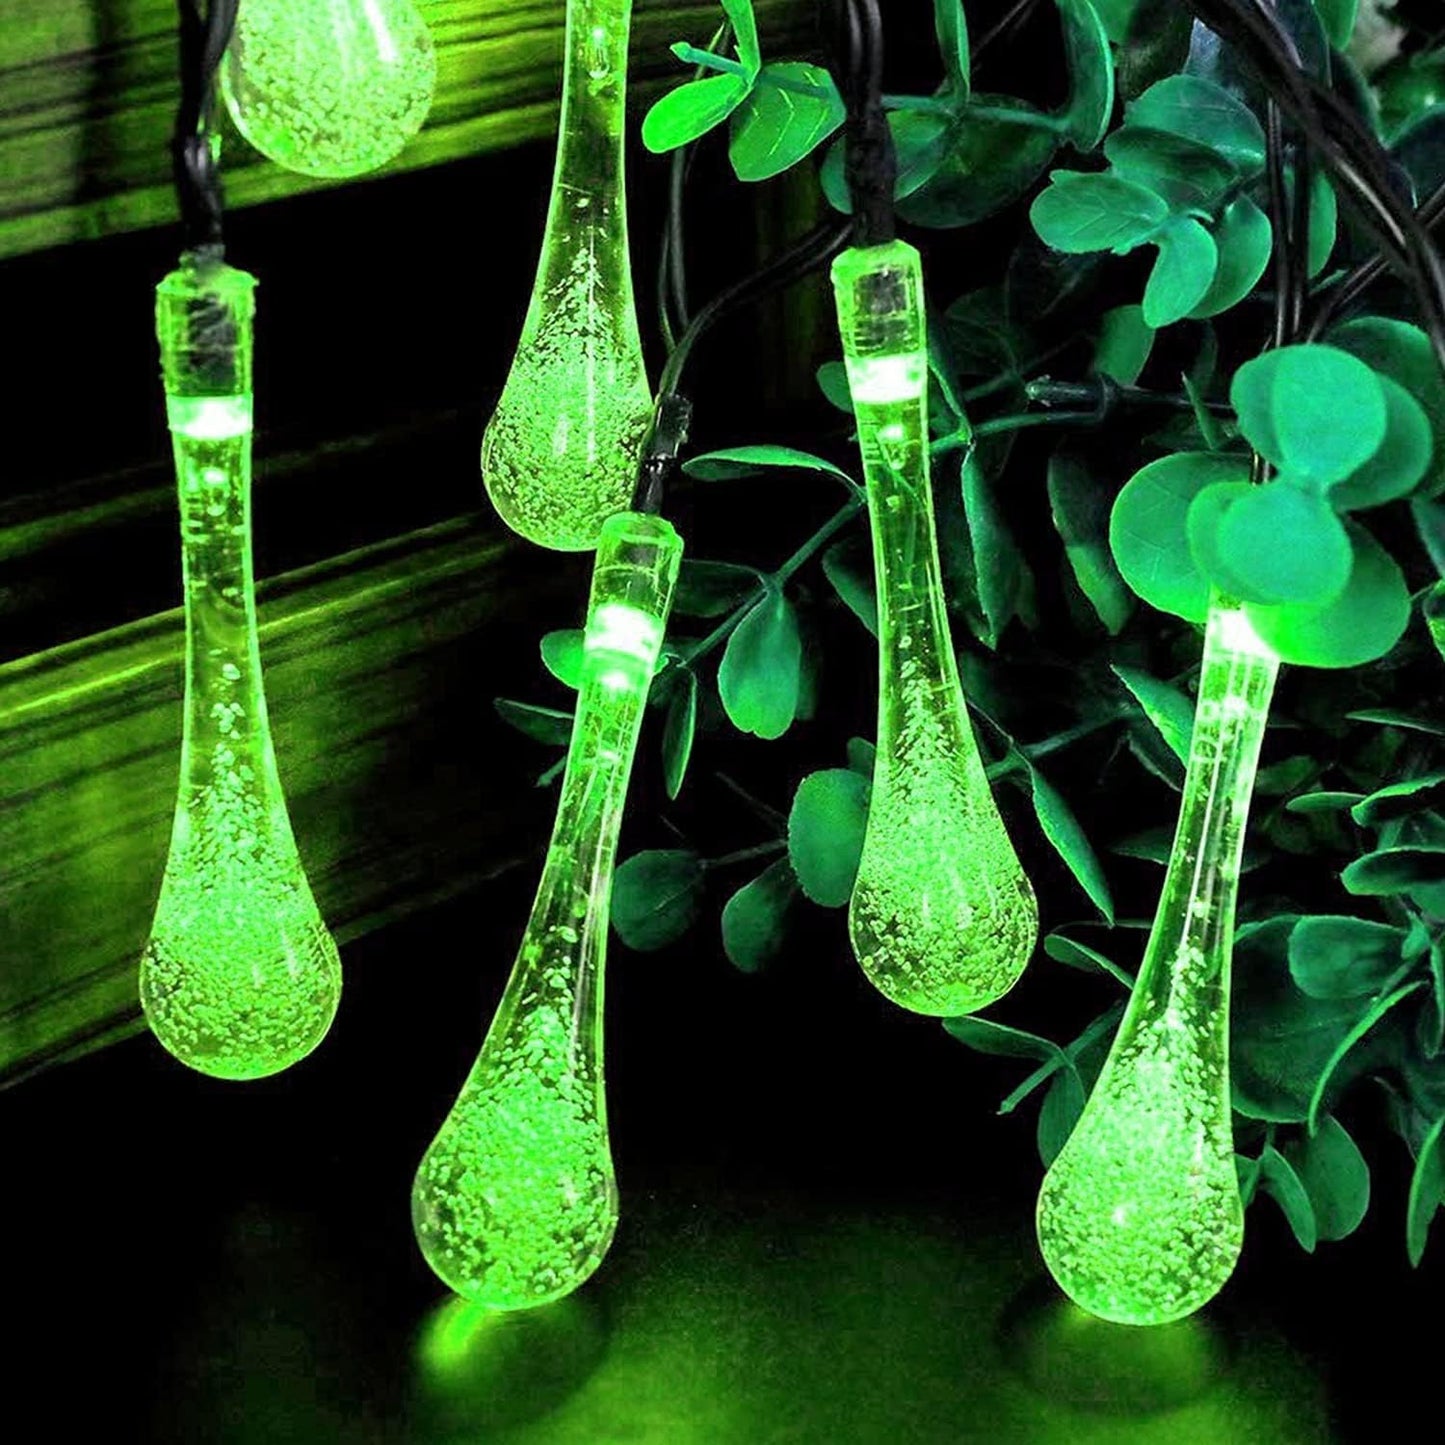 EYUVAA Crystal WaterDrop Shape LED Decorative Fairy Light, 18 Bulb 8 Meter Long LED String Lights for Decoration for Diwali Home, Festival (Green)